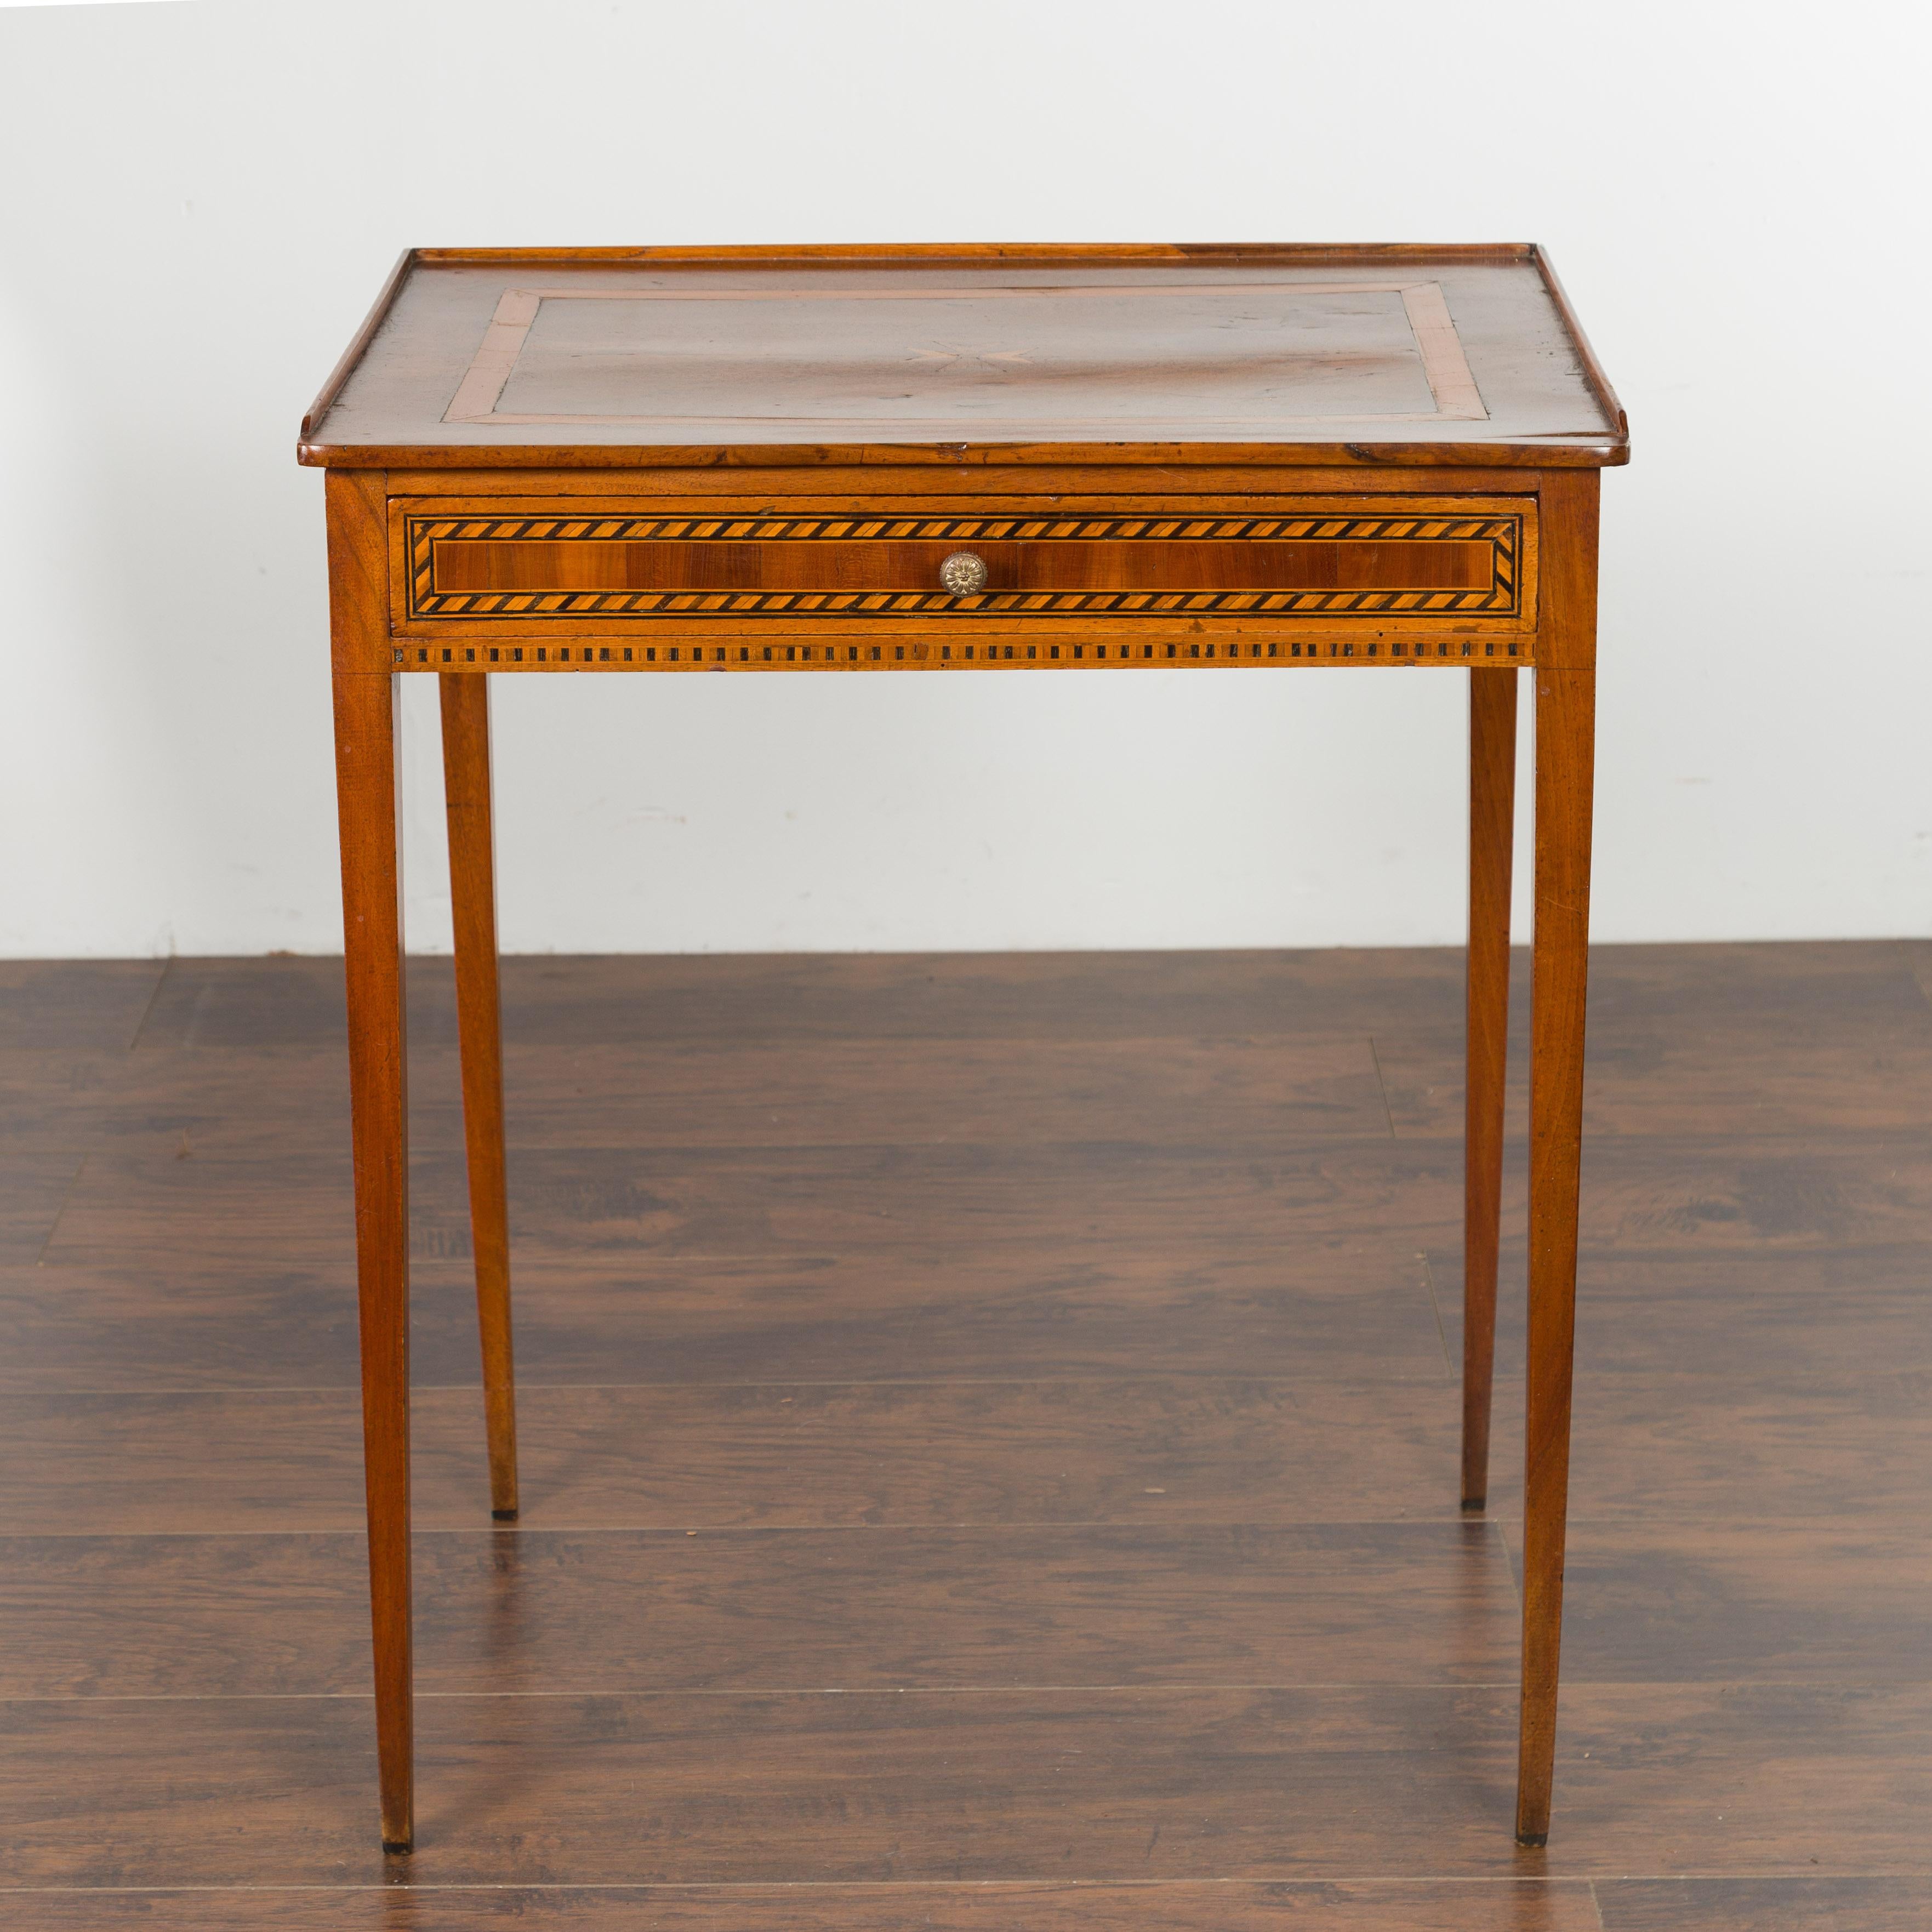 A French Napoléon III walnut side table from the late 19th century, with start inlay and single drawer. Created in France at the end of Emperor Napoléon III's reign, this walnut side table features a rectangular top with three quarter gallery,